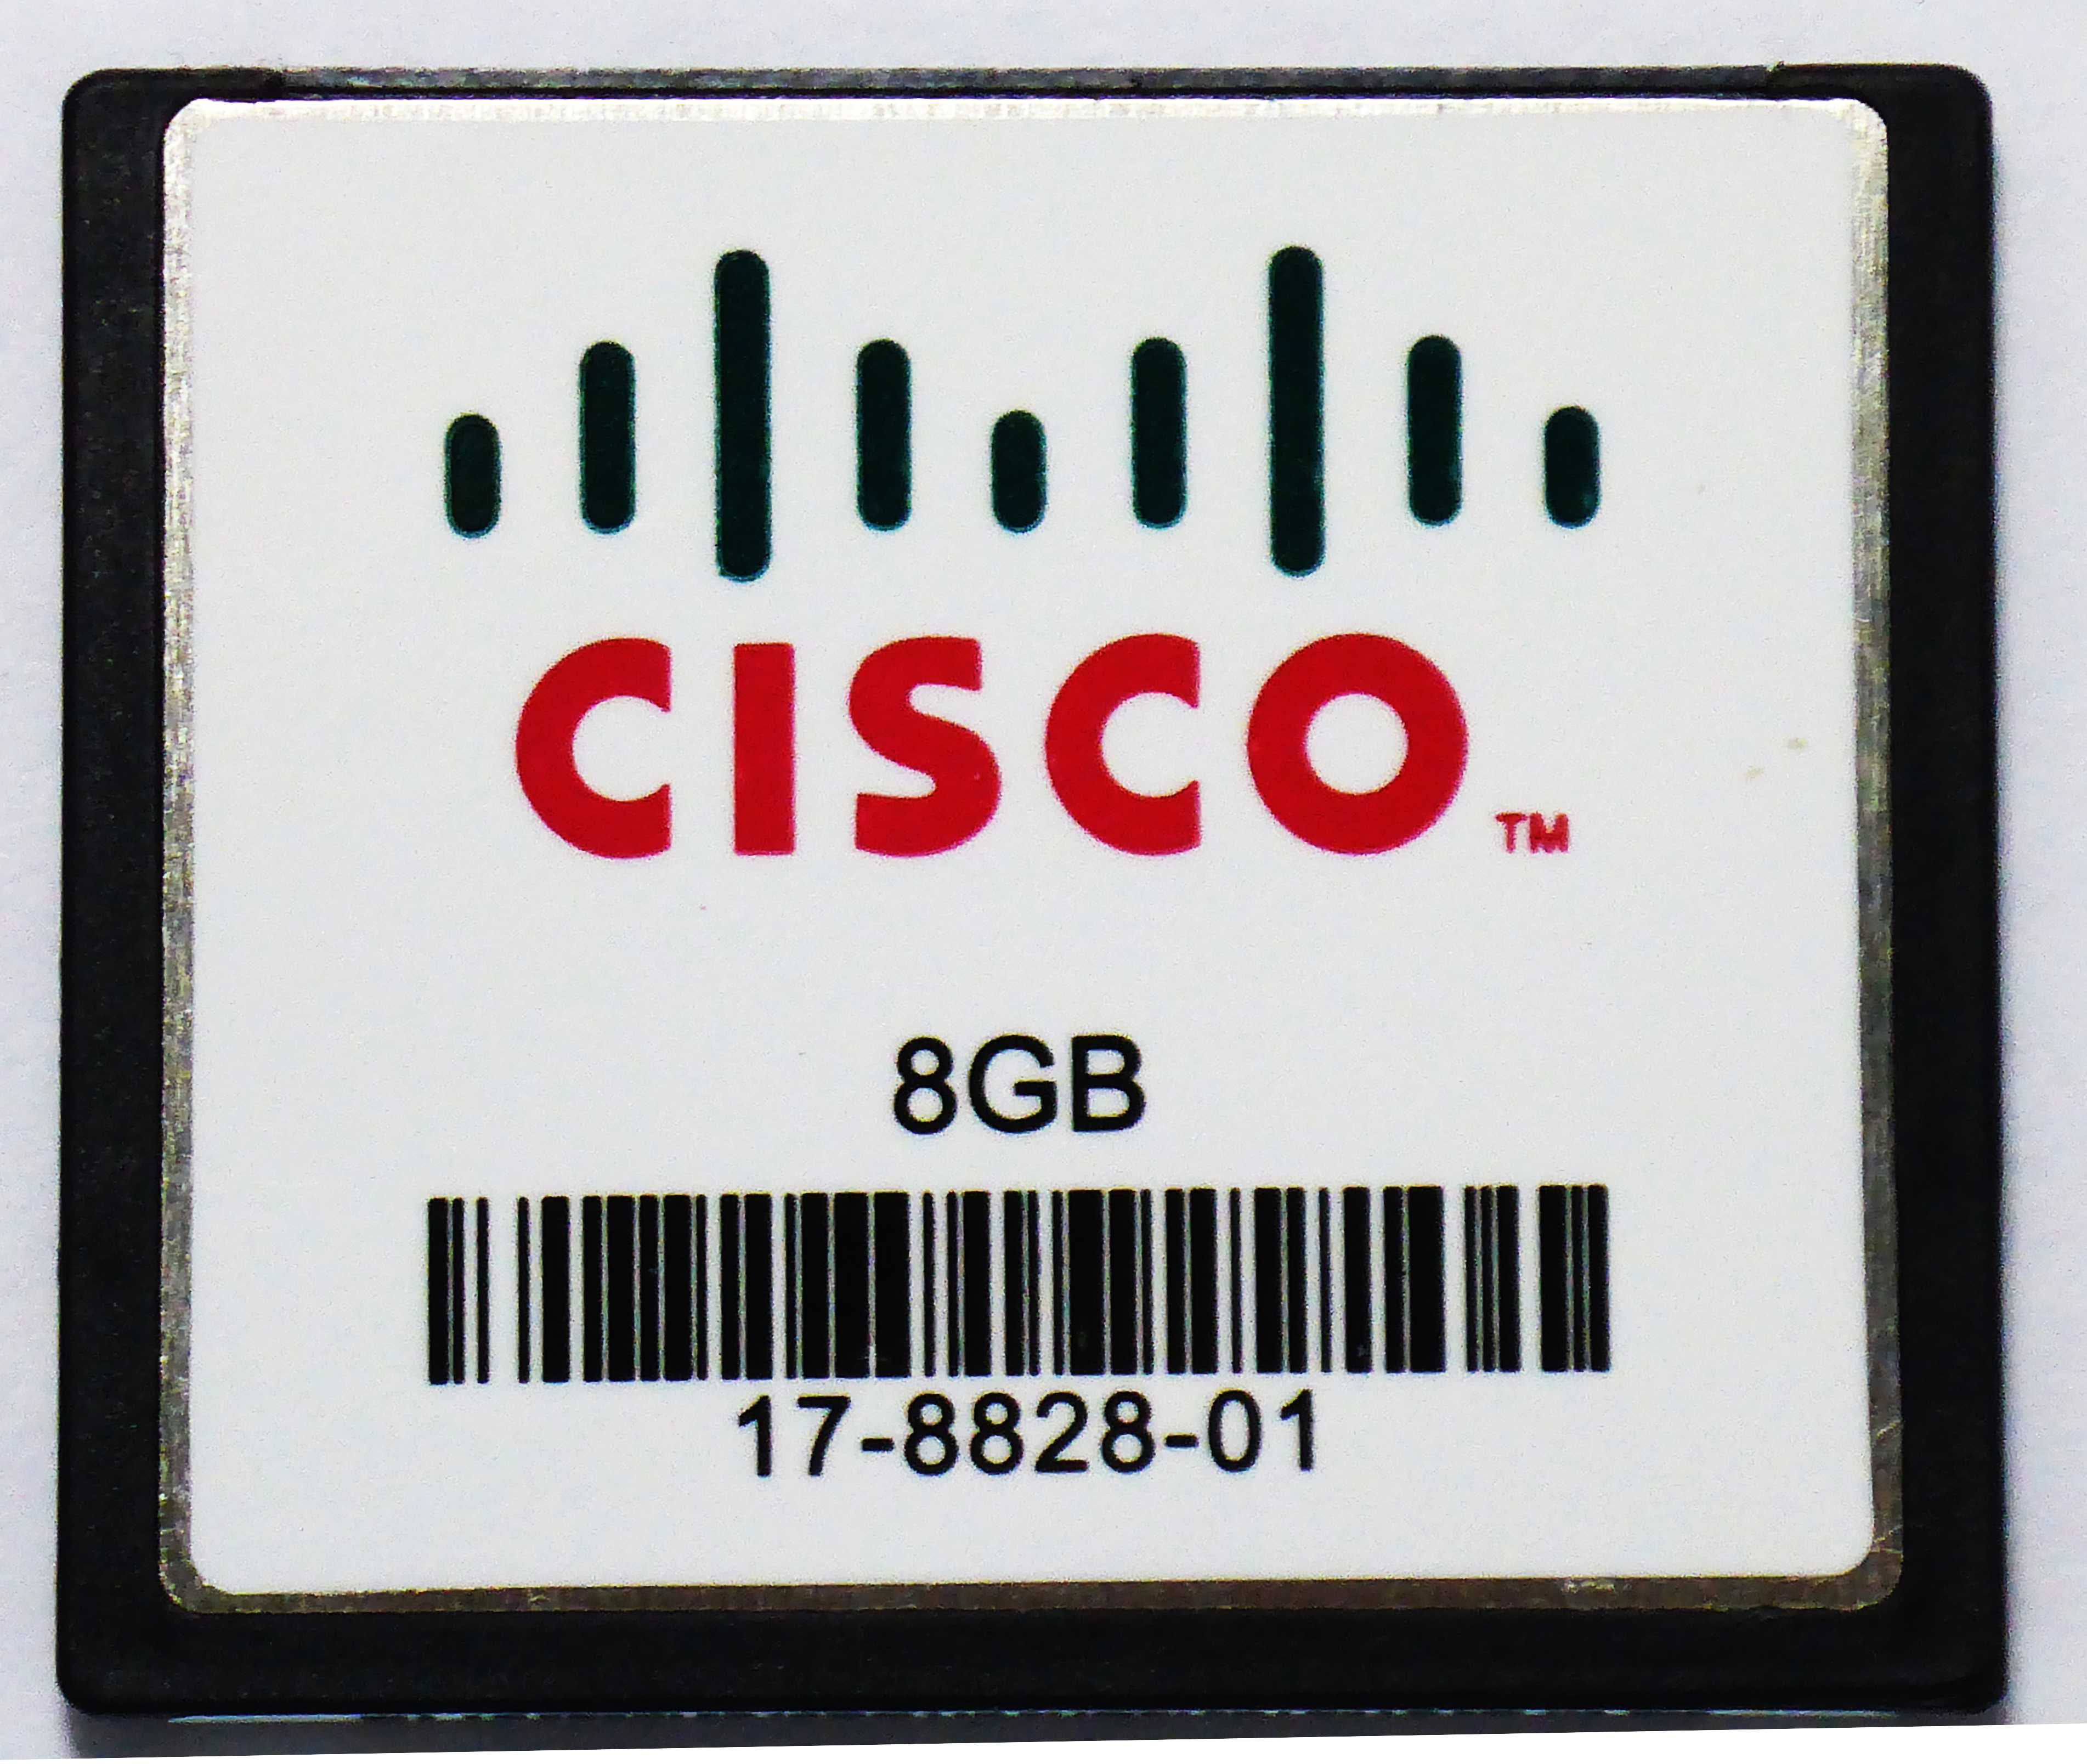 MEM-RSP720-CF512M 512MB Approved Compact Flash Memory for Cisco 7600 RSP720 